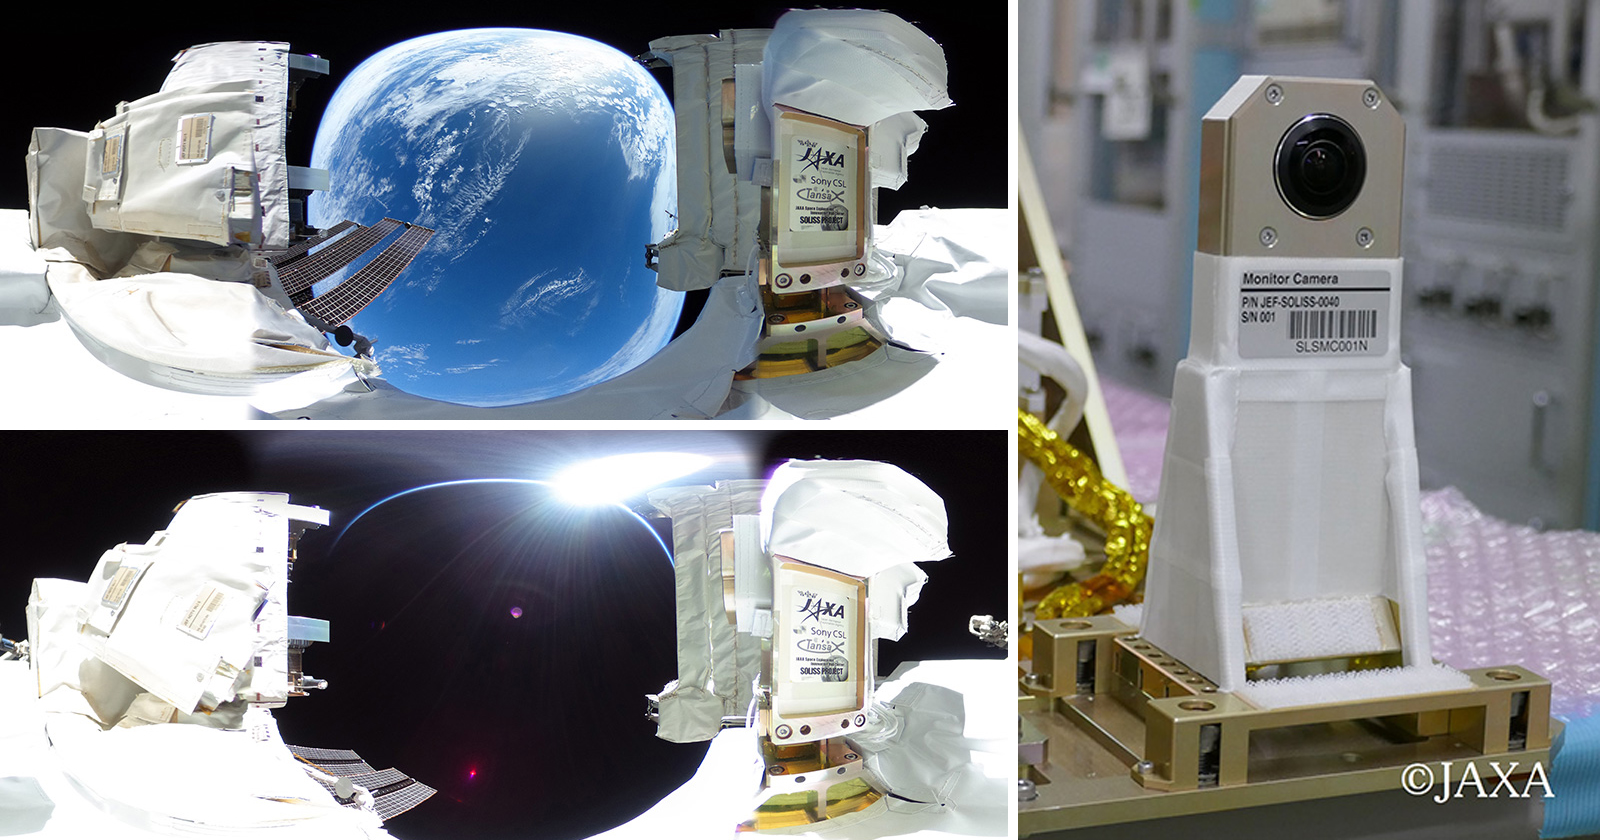 Ricoh Teamed Up with JAXA to Capture 360 Photos and Videos in Space